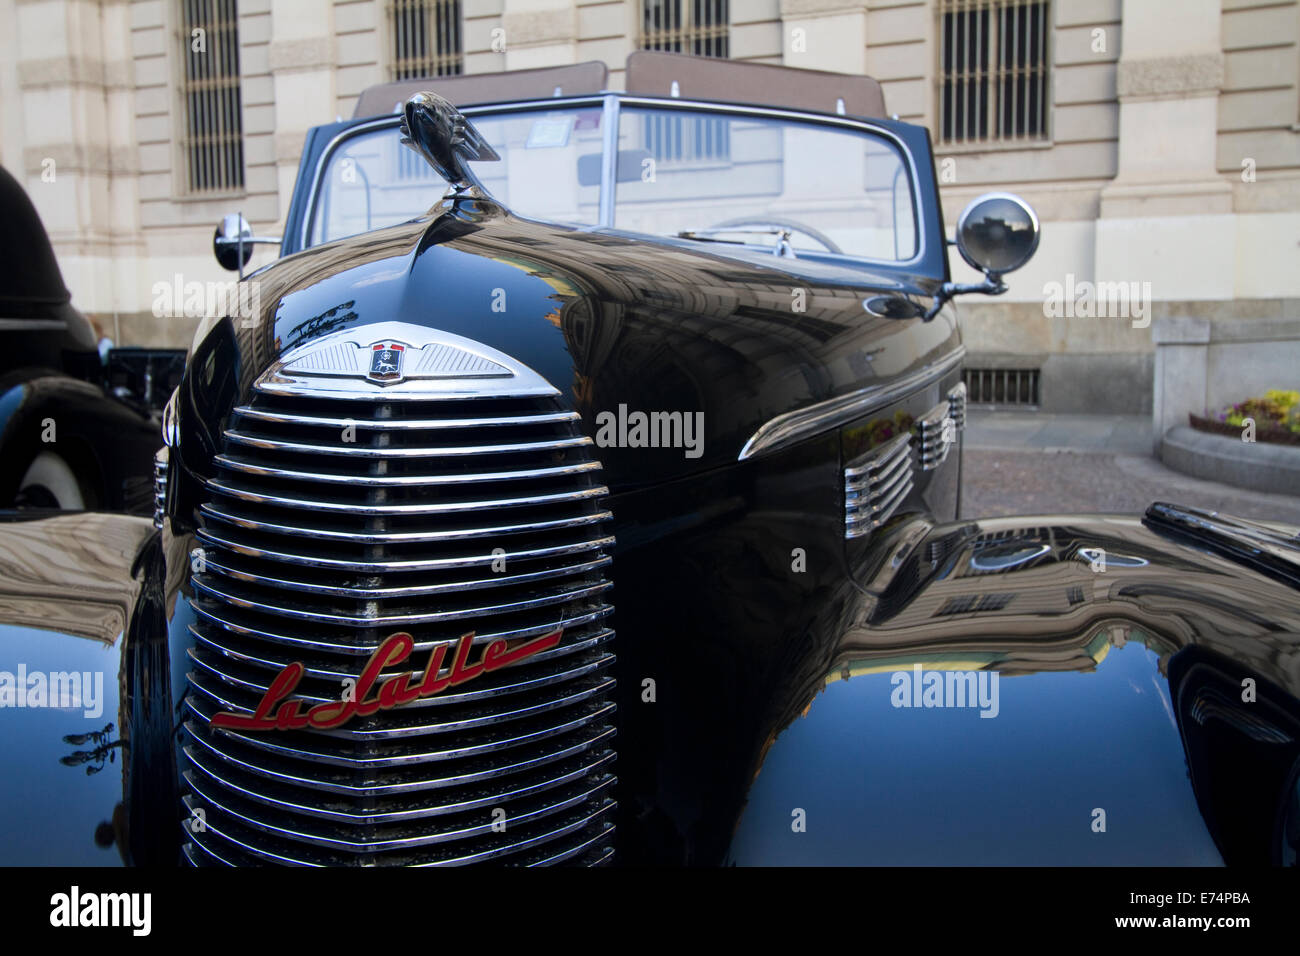 Torino, Italy. 6th September 2014.Front view on a 1940 La Salle Coupe. Collectors of historical cars met in Torino for a car elegance competition. Stock Photo